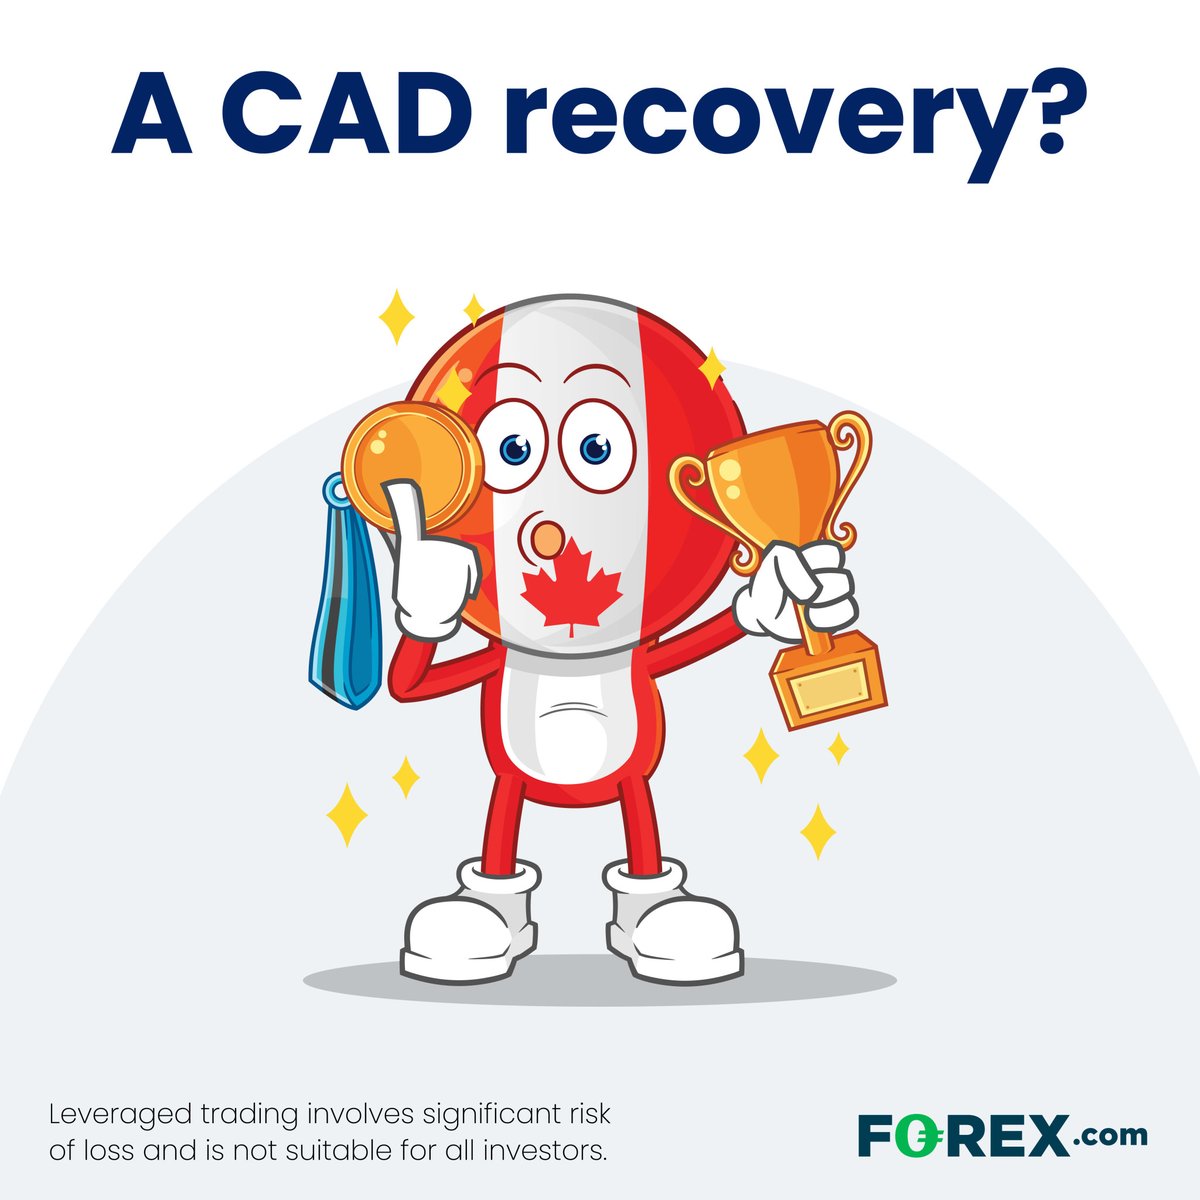 Canadian GDP growth surprised to the upside on Mar. 28, and wage inflation rose from 3.88% YoY to 3.90% YoY. After a rough start to 2024, could a hawkish Bank of Canada help the CAD outperform the USD in Q2?